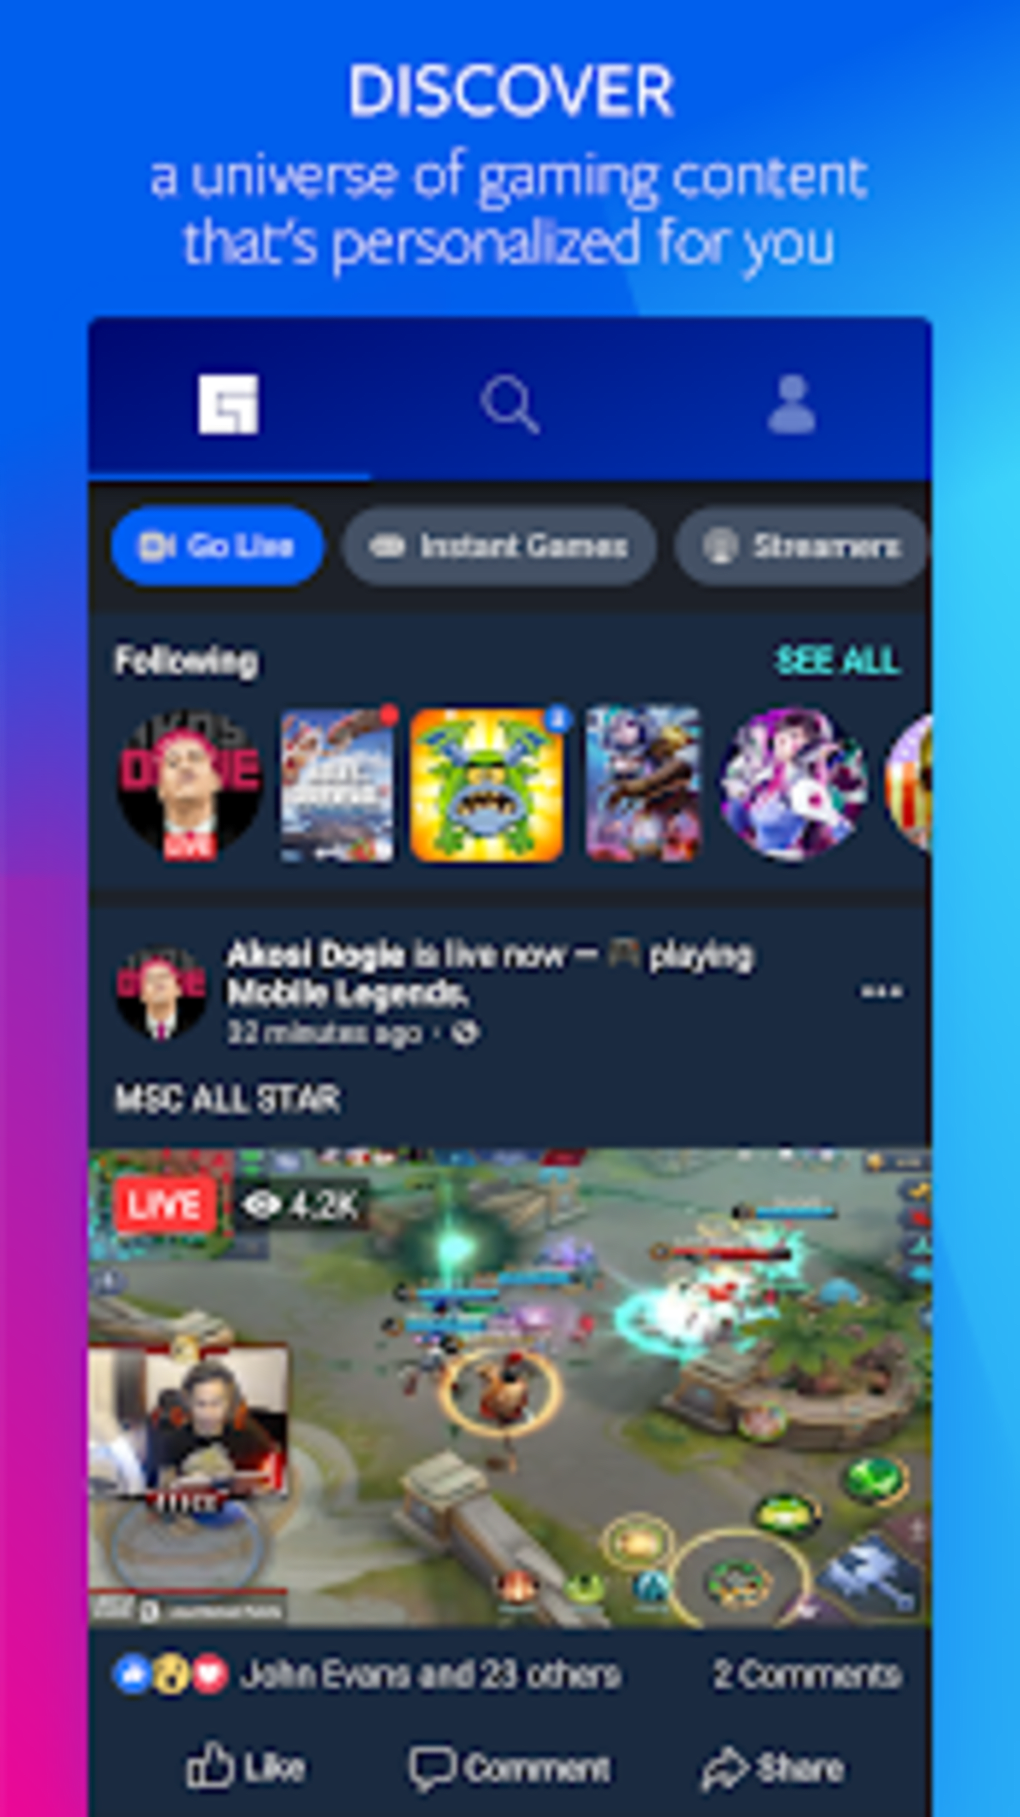 Instant Gaming - APK Download for Android